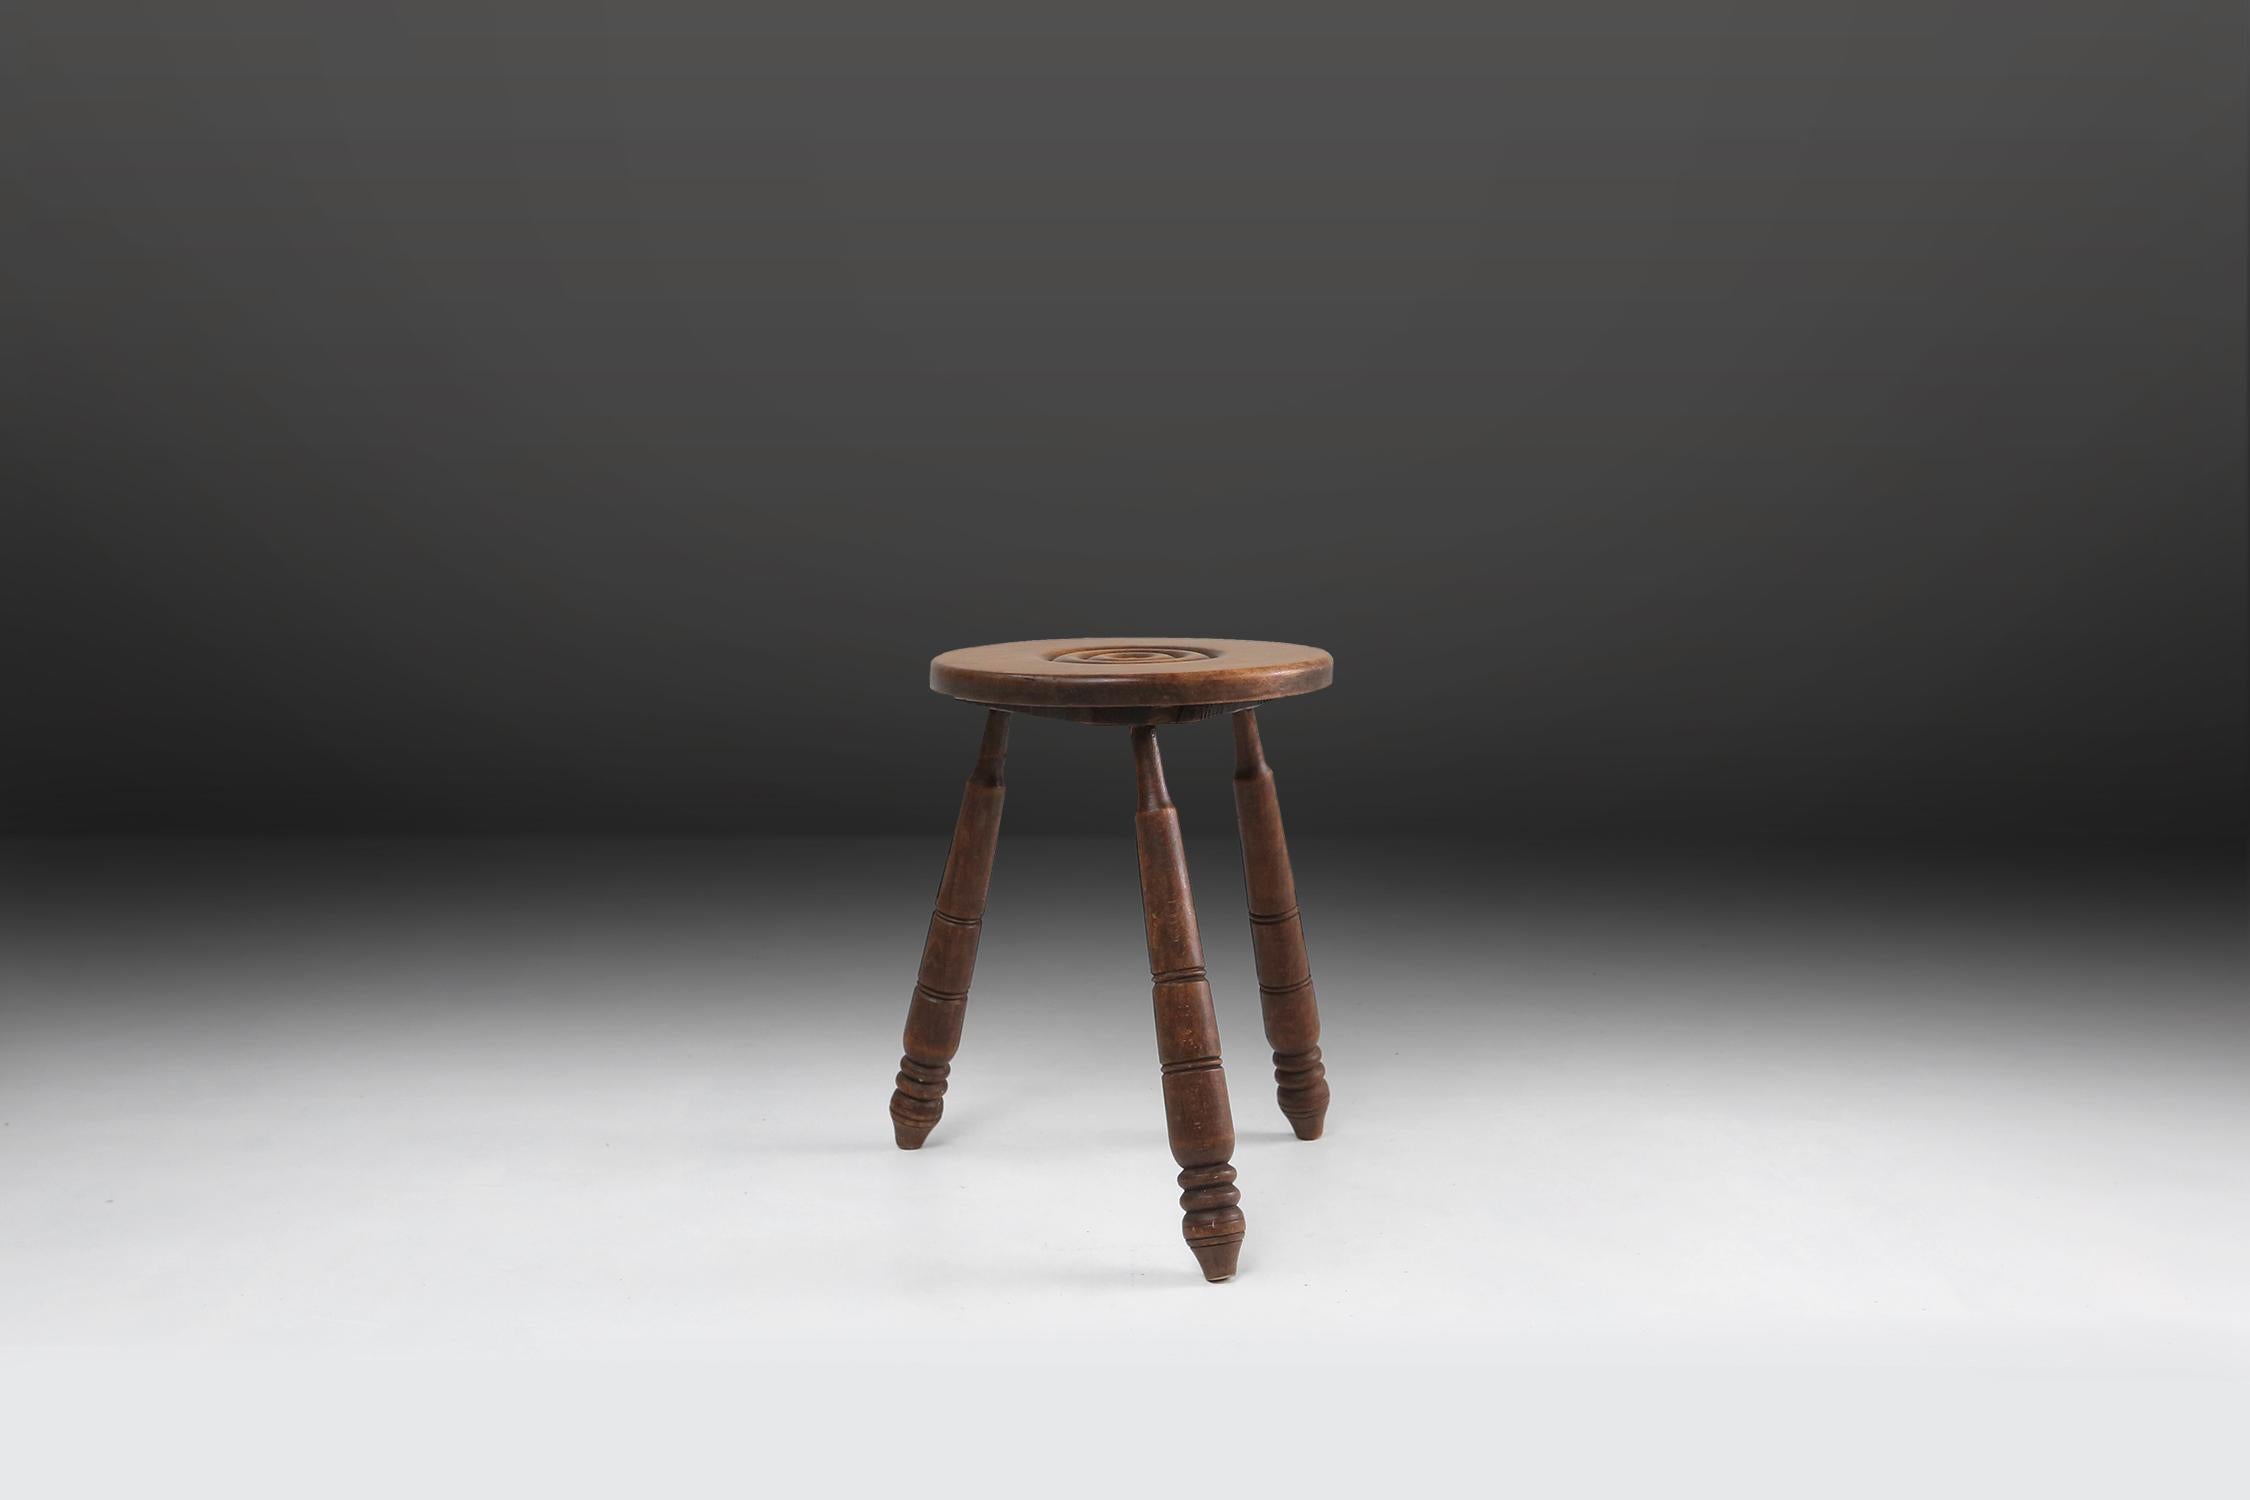 Brutalist stool made of solid wood with some nice patina on the wood.